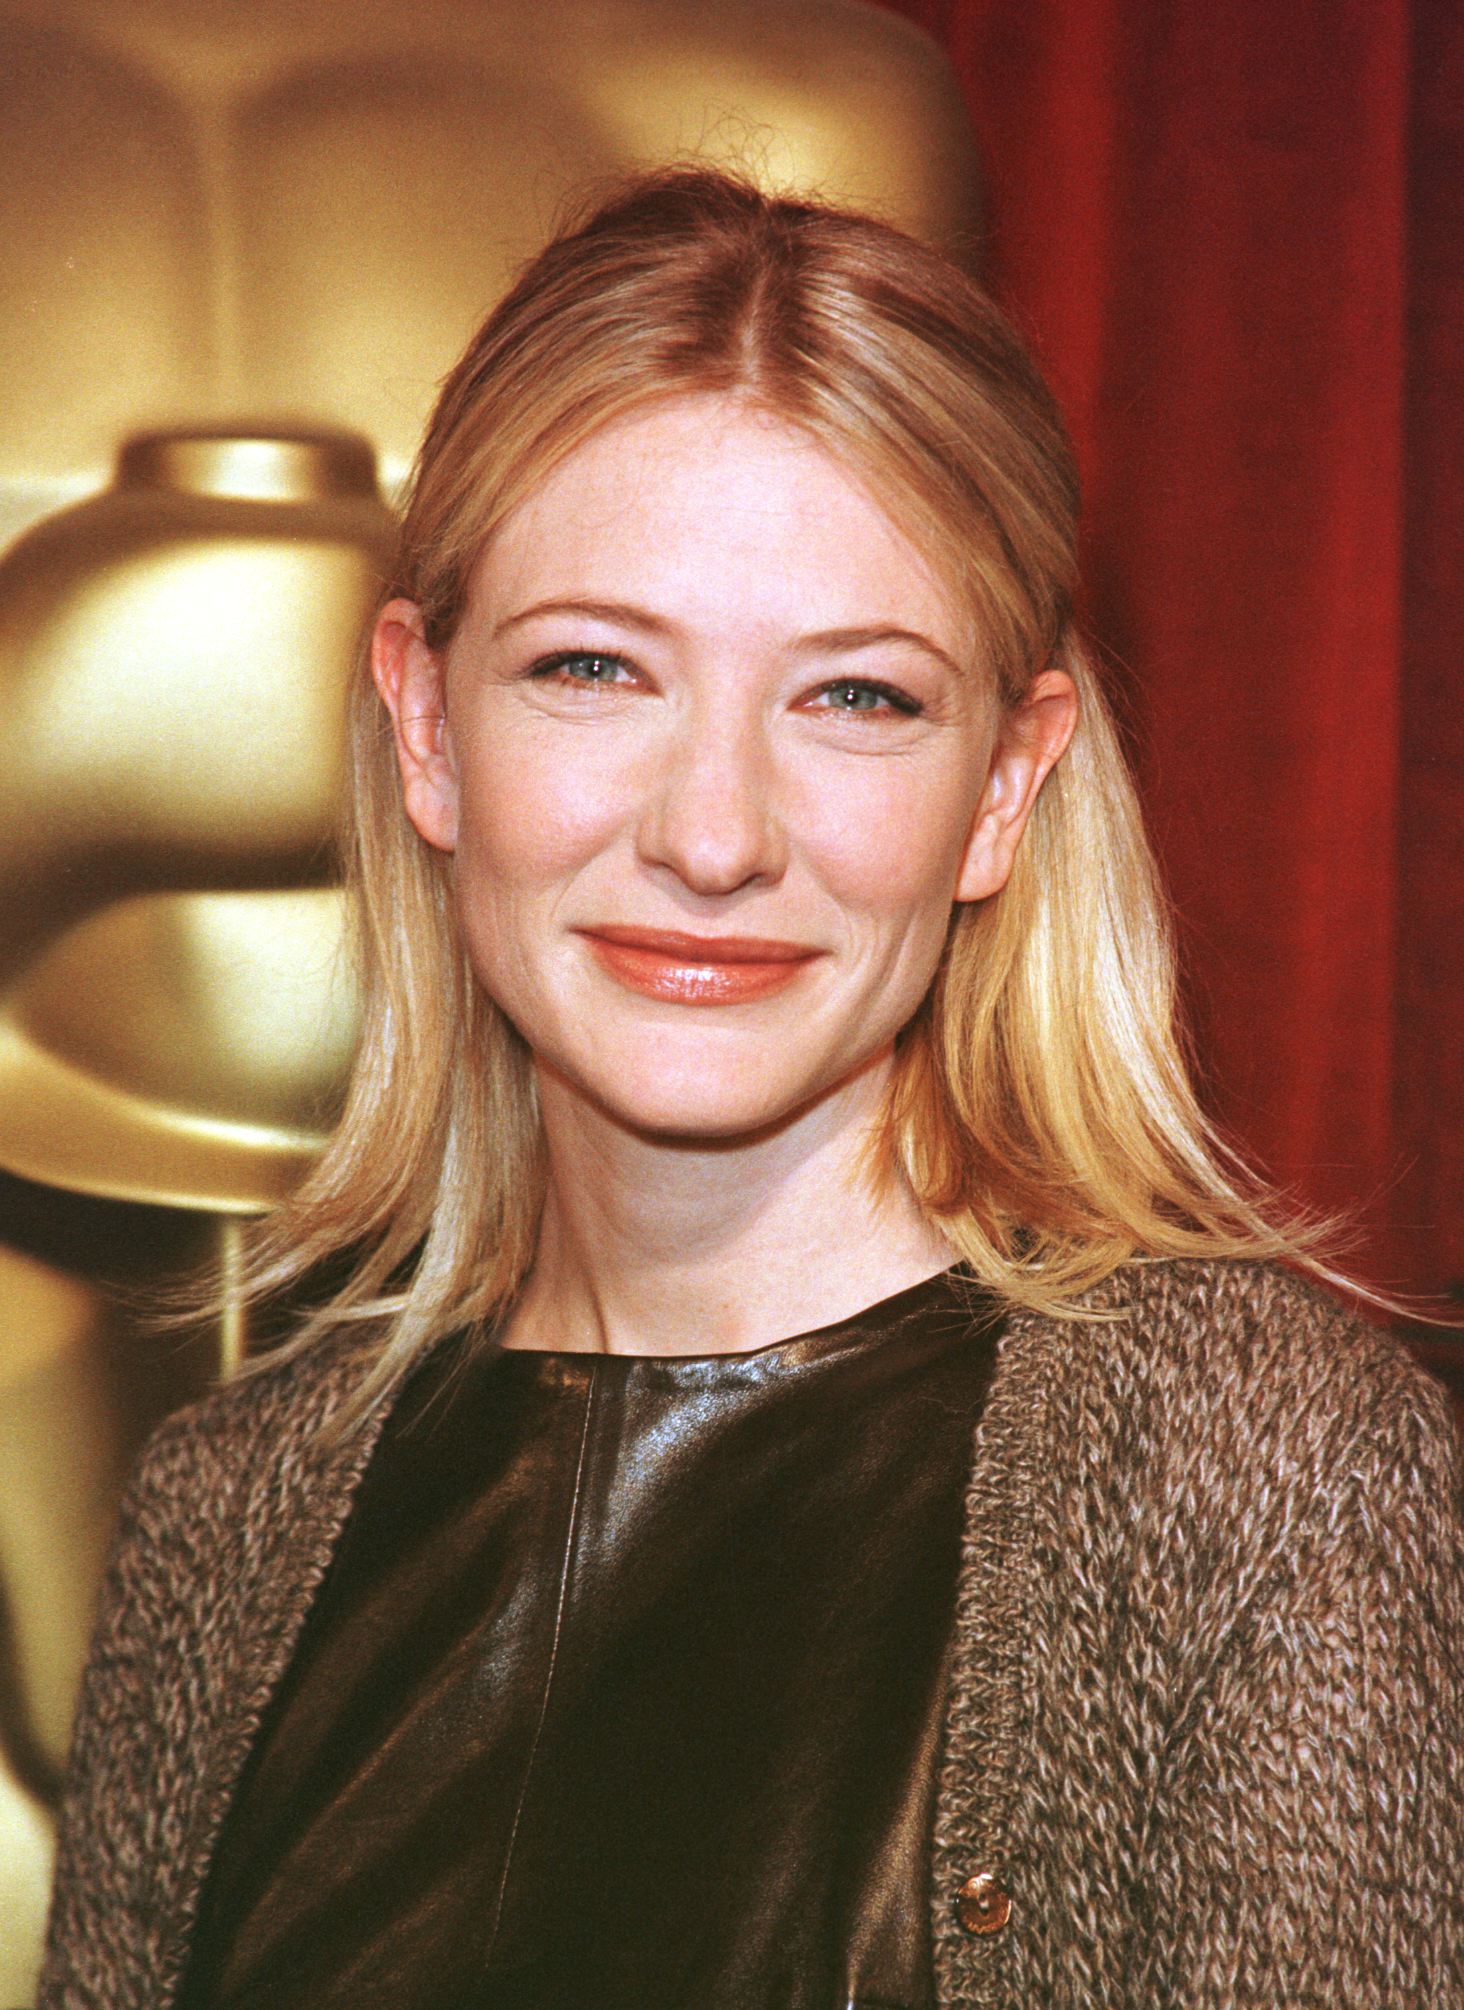 Cate Blanchett attends the annual Oscar nominees luncheon on March 8, 1999 | Source: Getty Images